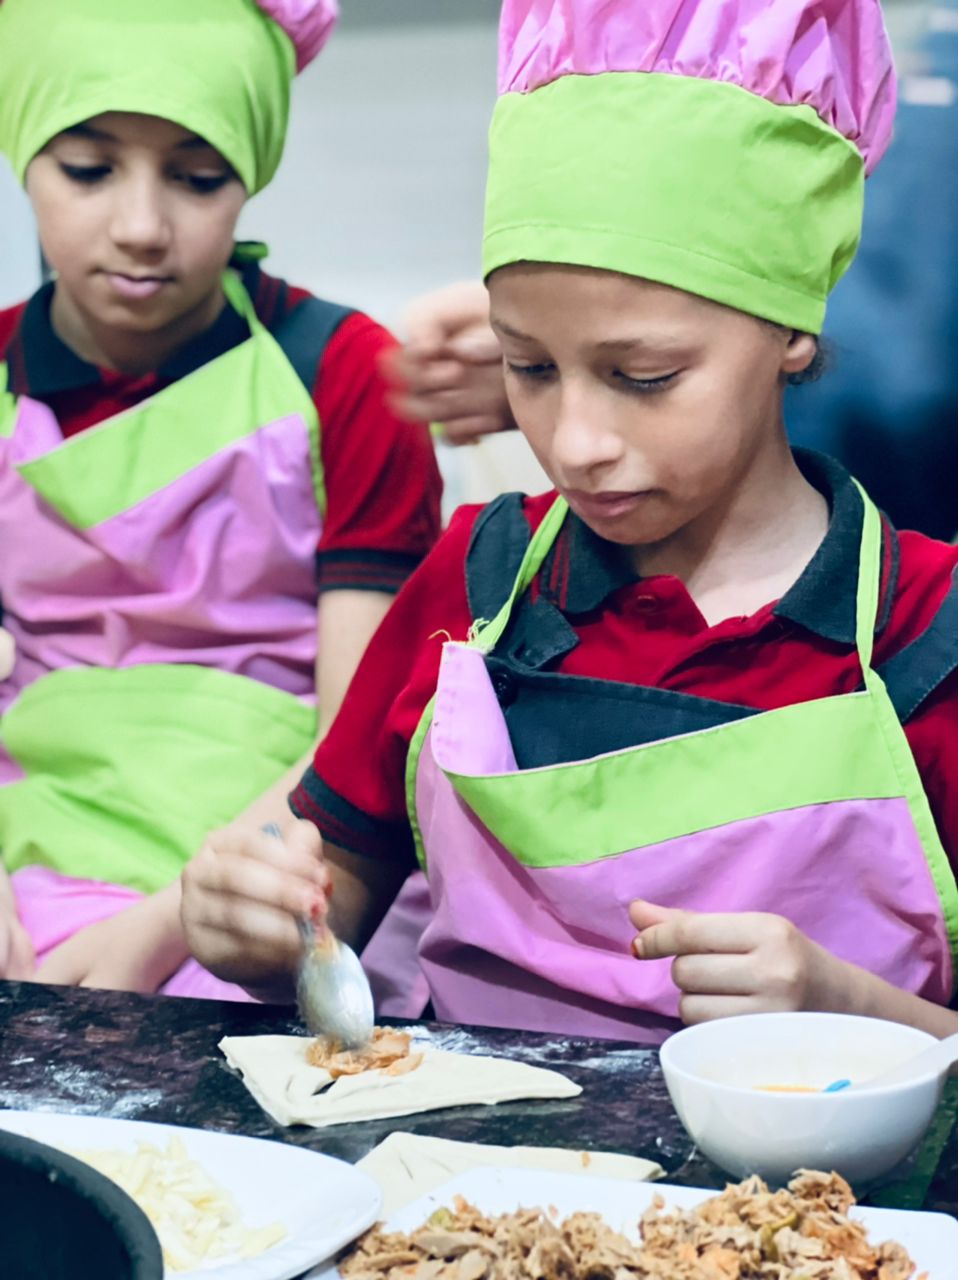 fourth-grade students performing a cooking activity